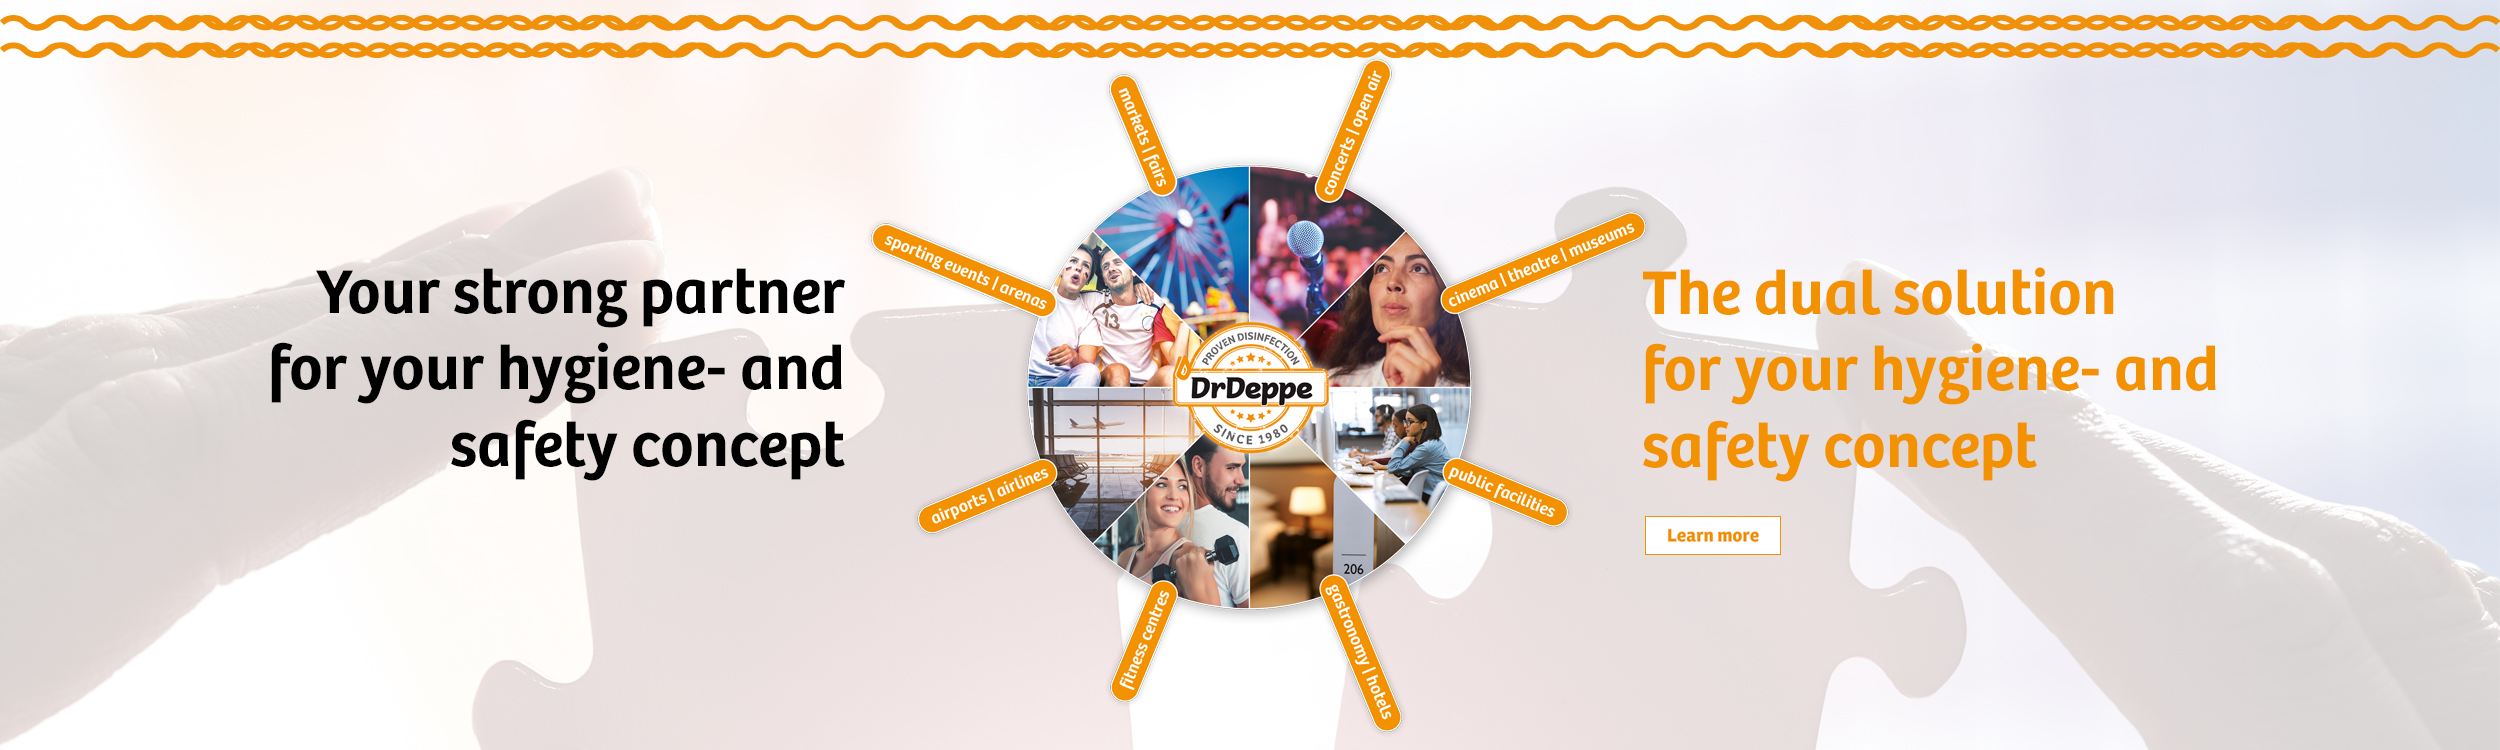 DrDeppe - Hygiene and safety concept